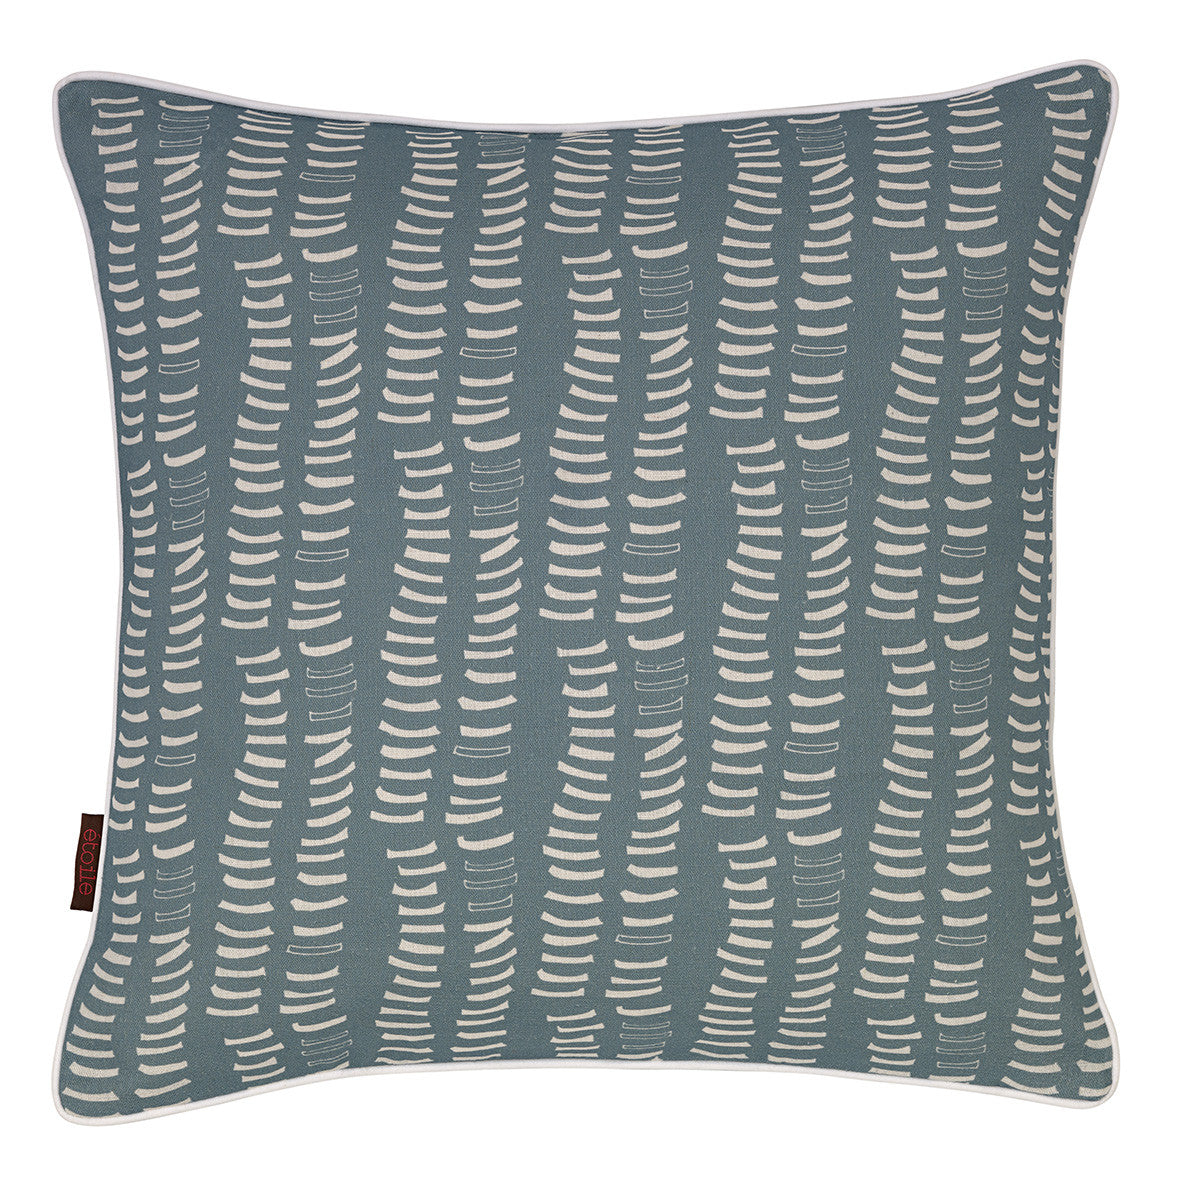 Graphic Adams Rib Pattern Linen Union Printed Decorative Throw Pillow in Light Chambray Blue and White